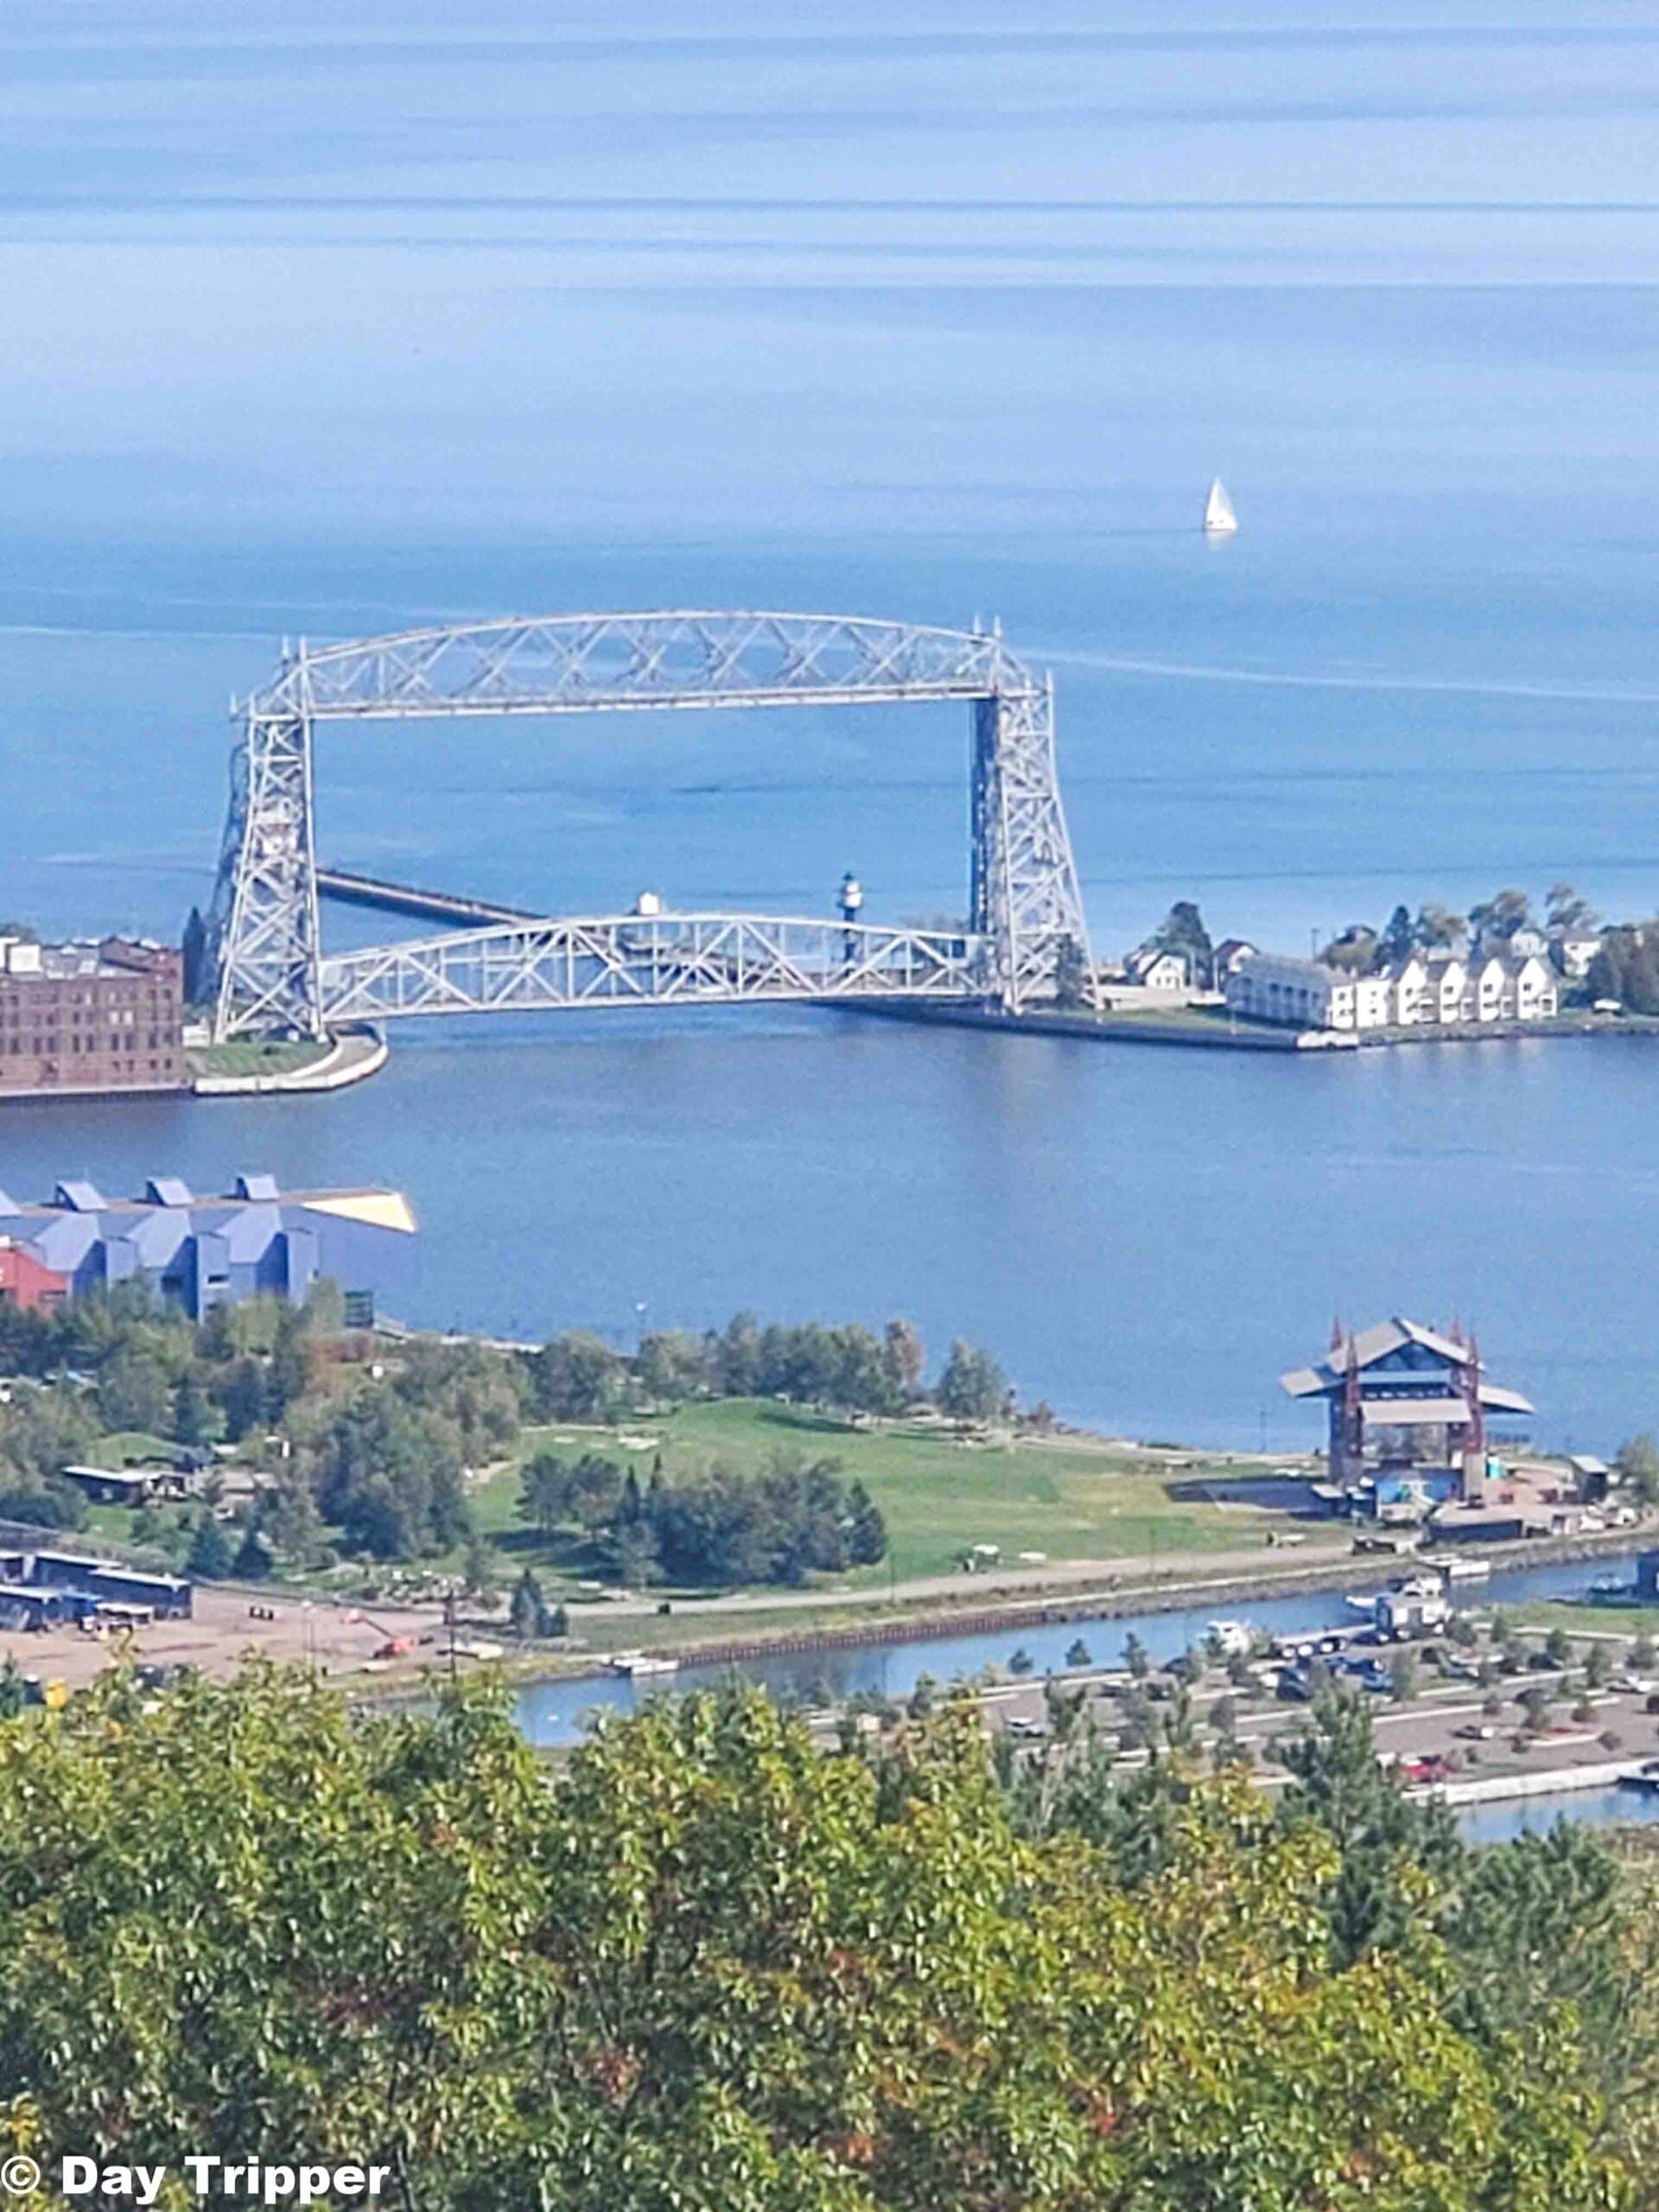 Things to do in Canal Park Duluth